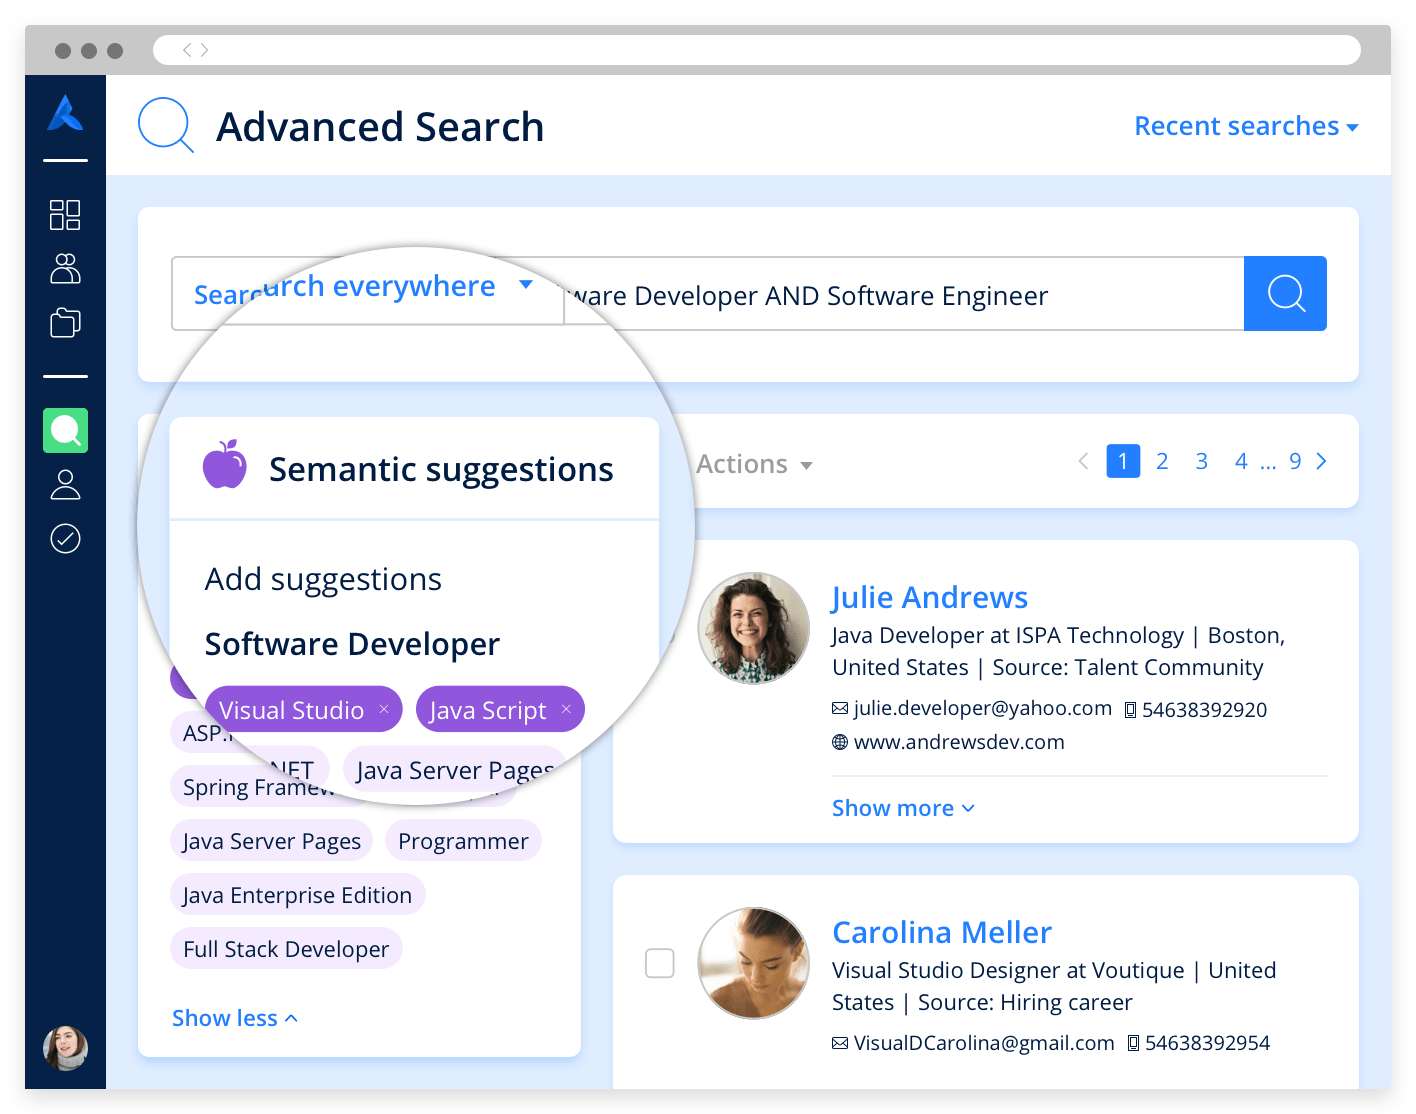 The advanced search page, highlighting semantic suggestions for a new candidate search.